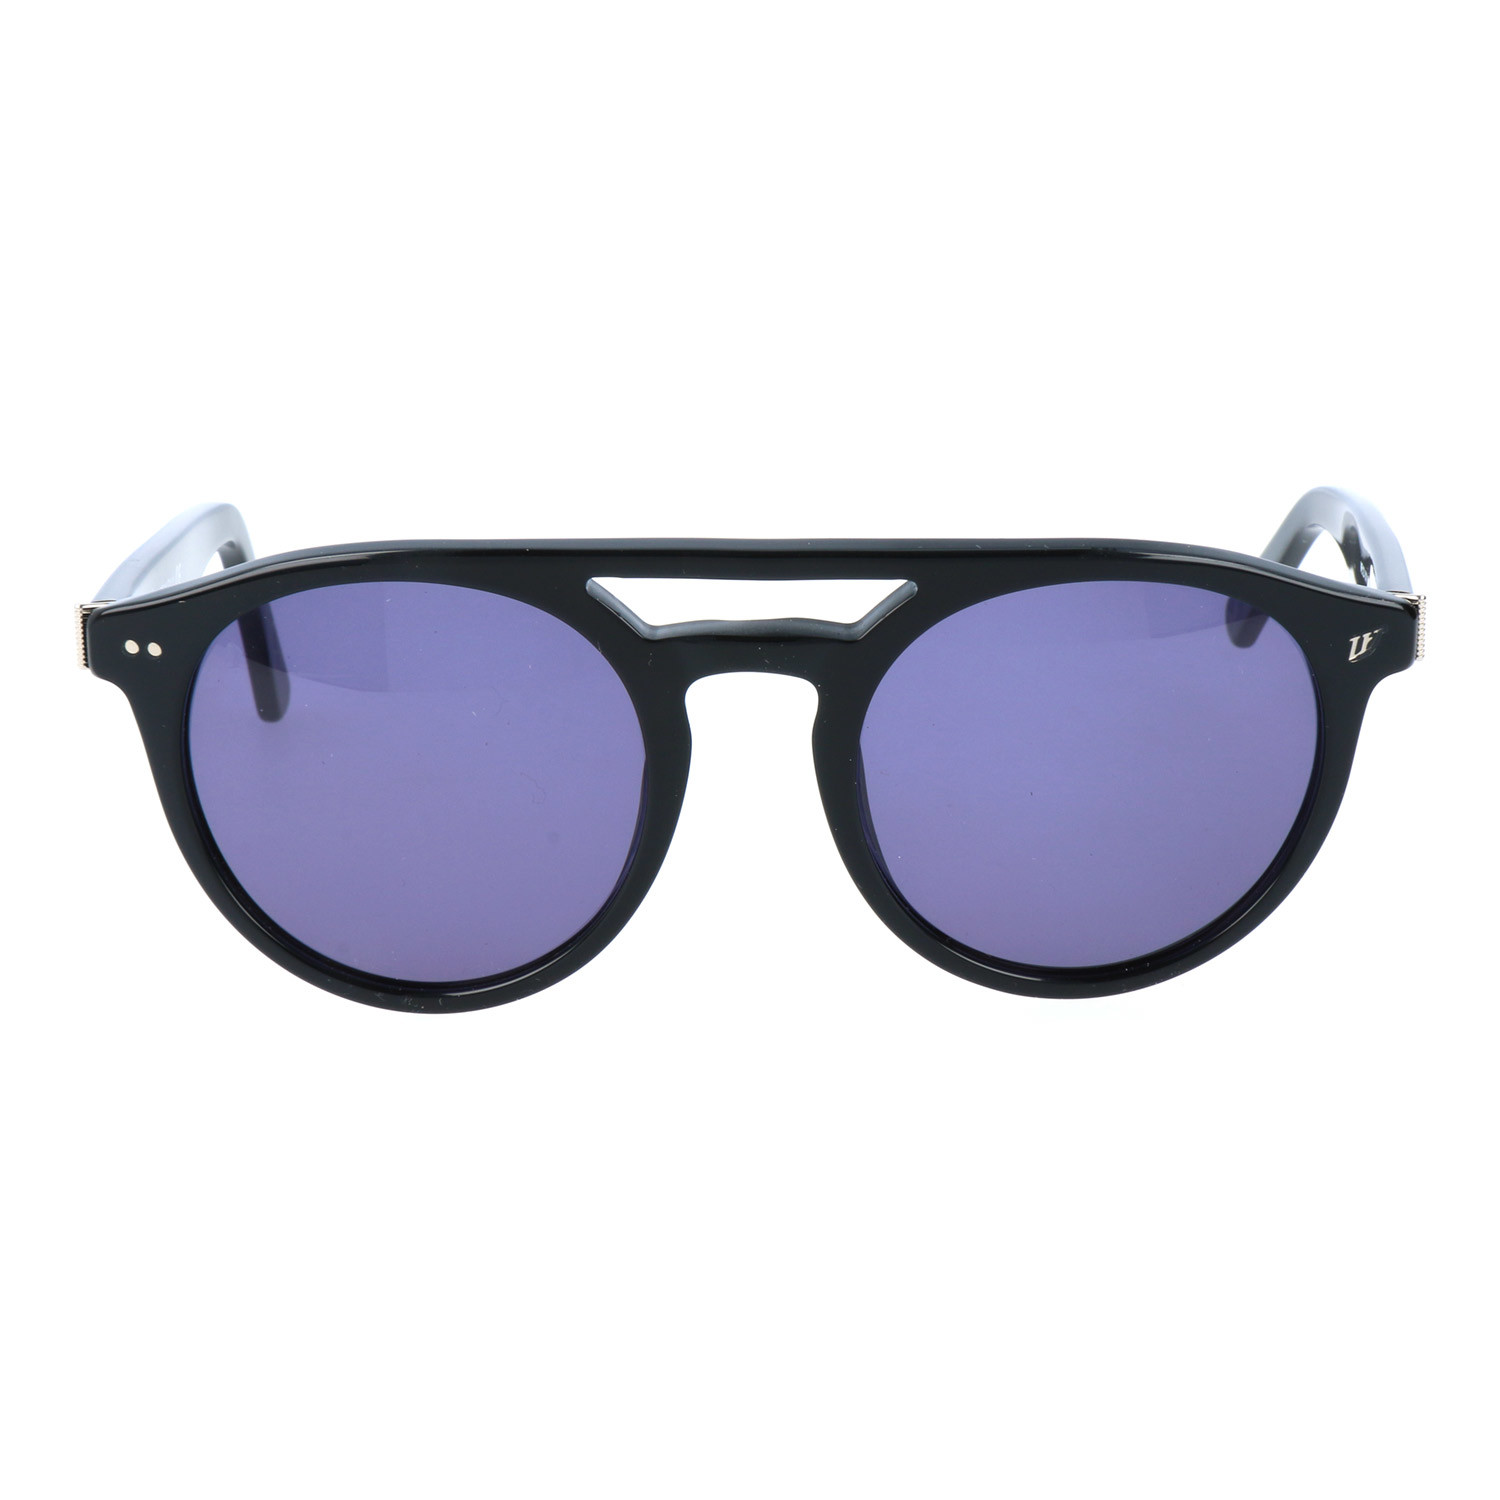 Double Bar Rounded Sunglasses // Black - Web Eyewear - Touch of Modern